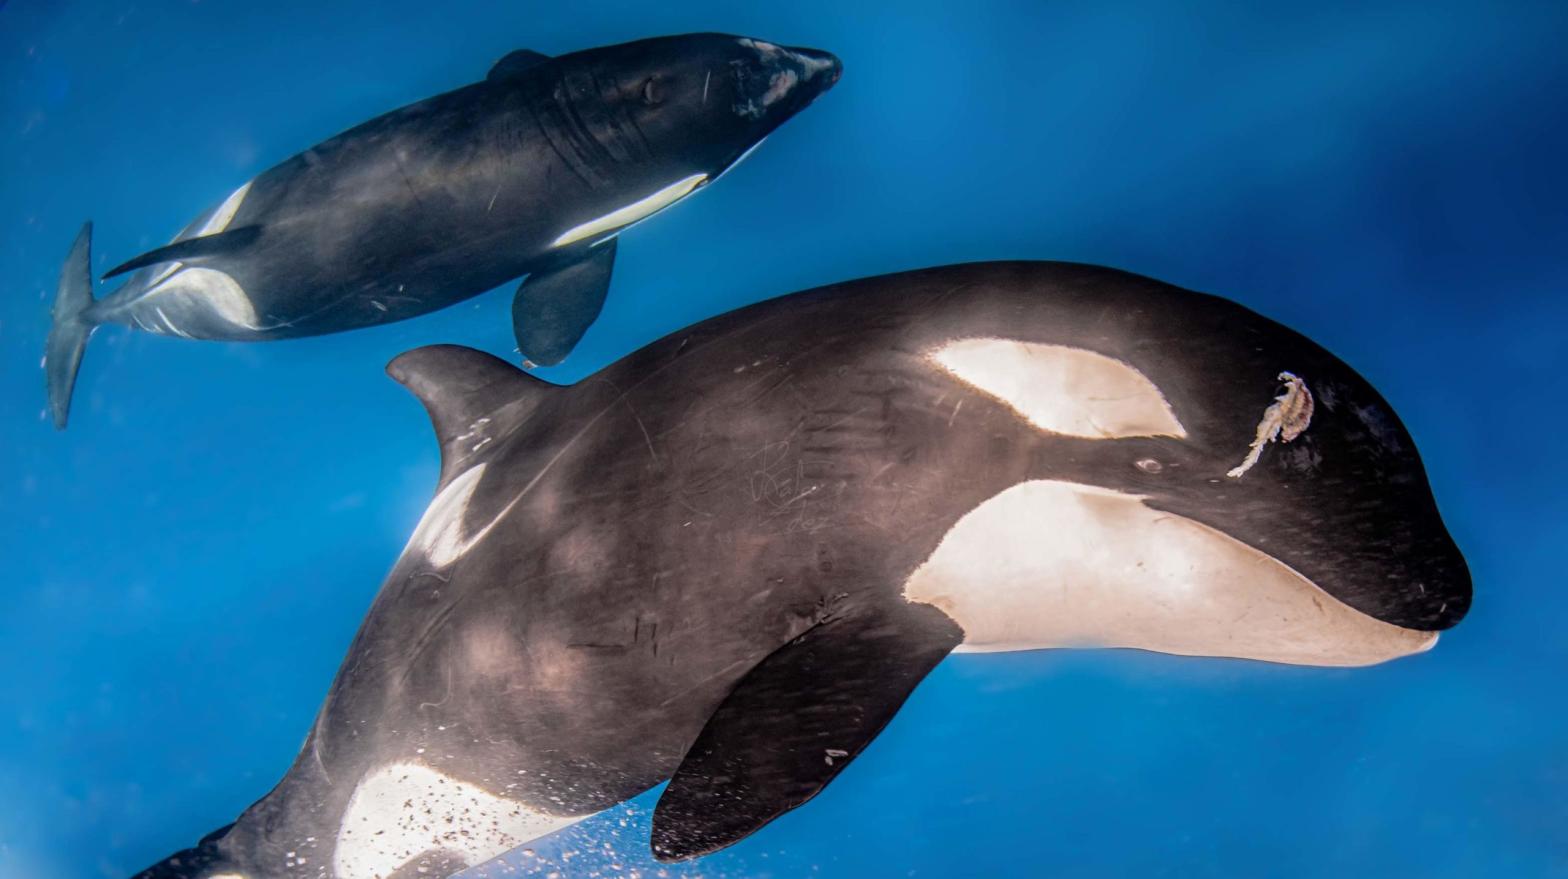 Two of the offending orcas, Gladis White and Gladis Black, exhibiting recent injuries.  (Image: Rafael Fernández/International Working Group of Atlantic Orcas)